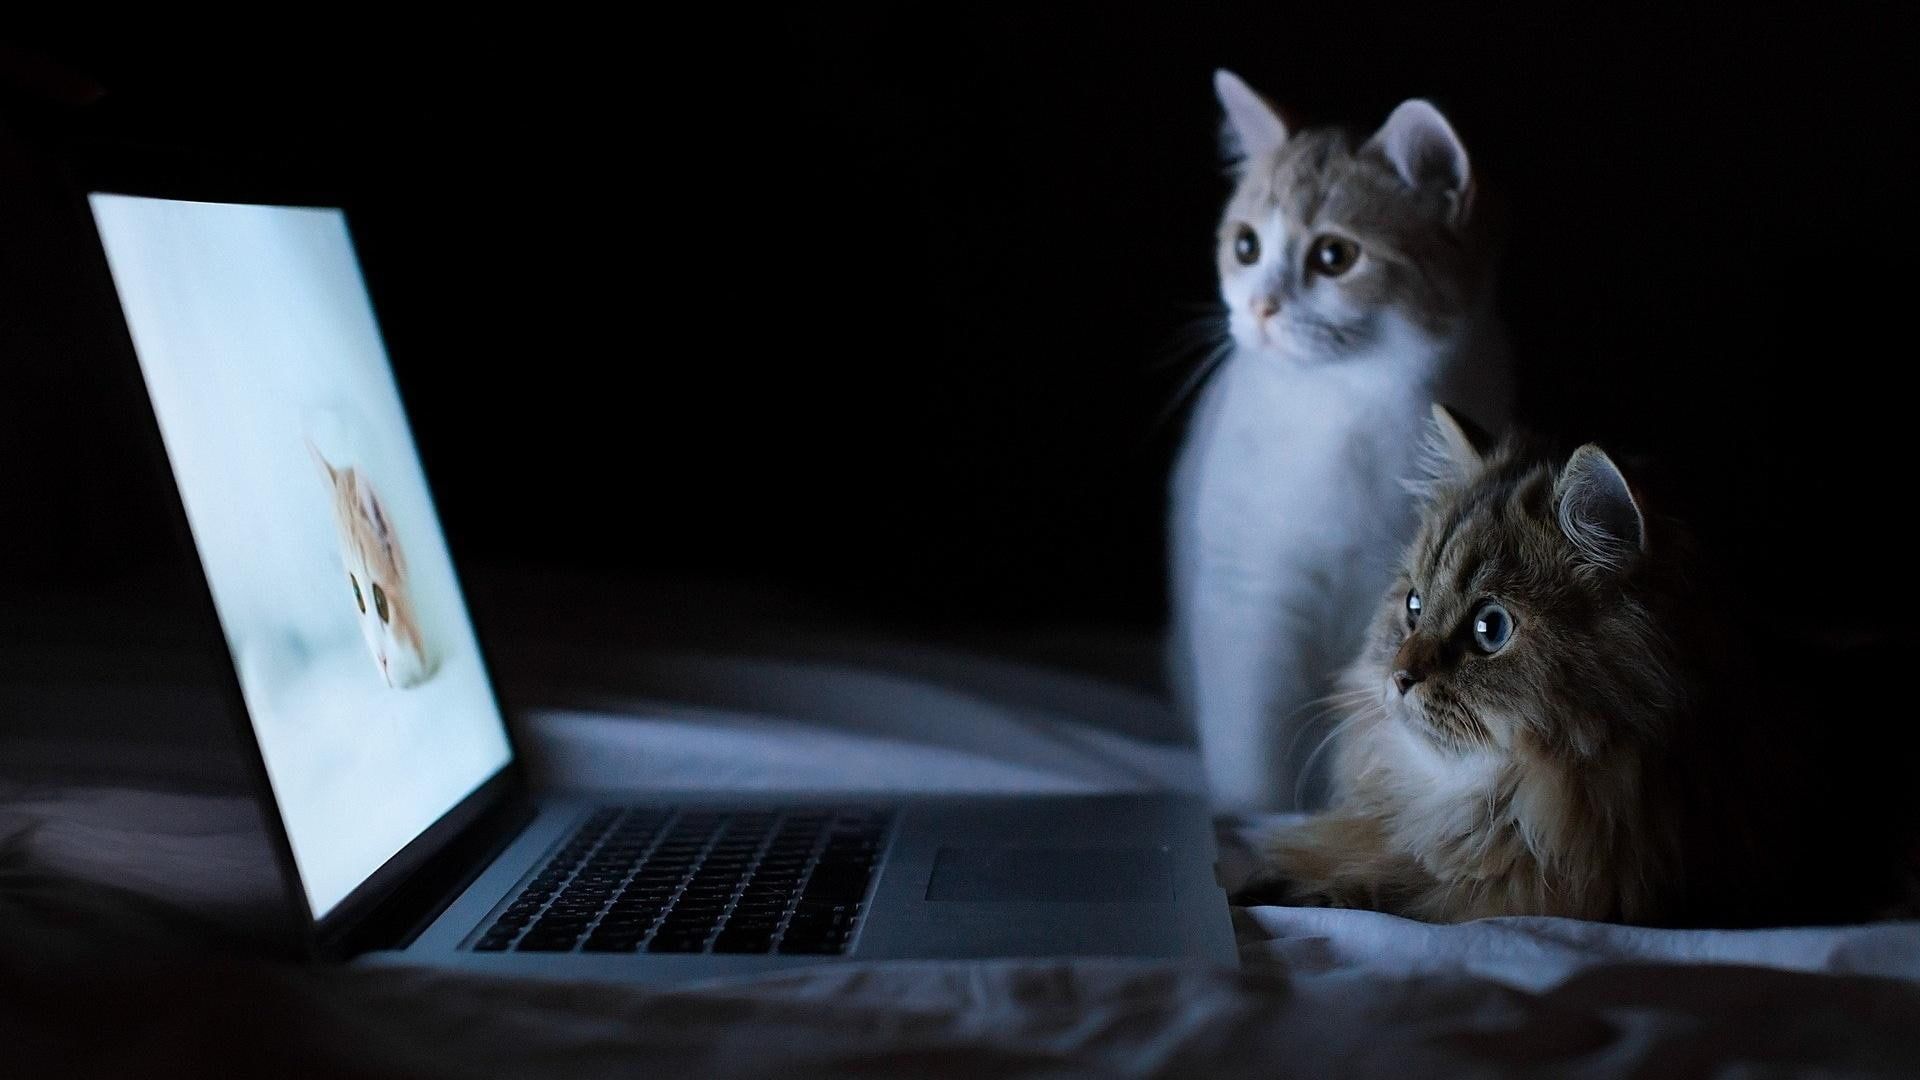 Two Cats Looking At A Pc Labtop, two cats and laptop computer #cats #funny pc labtop #watching #animals P. Cat wallpaper, Animal wallpaper, Funny wallpaper